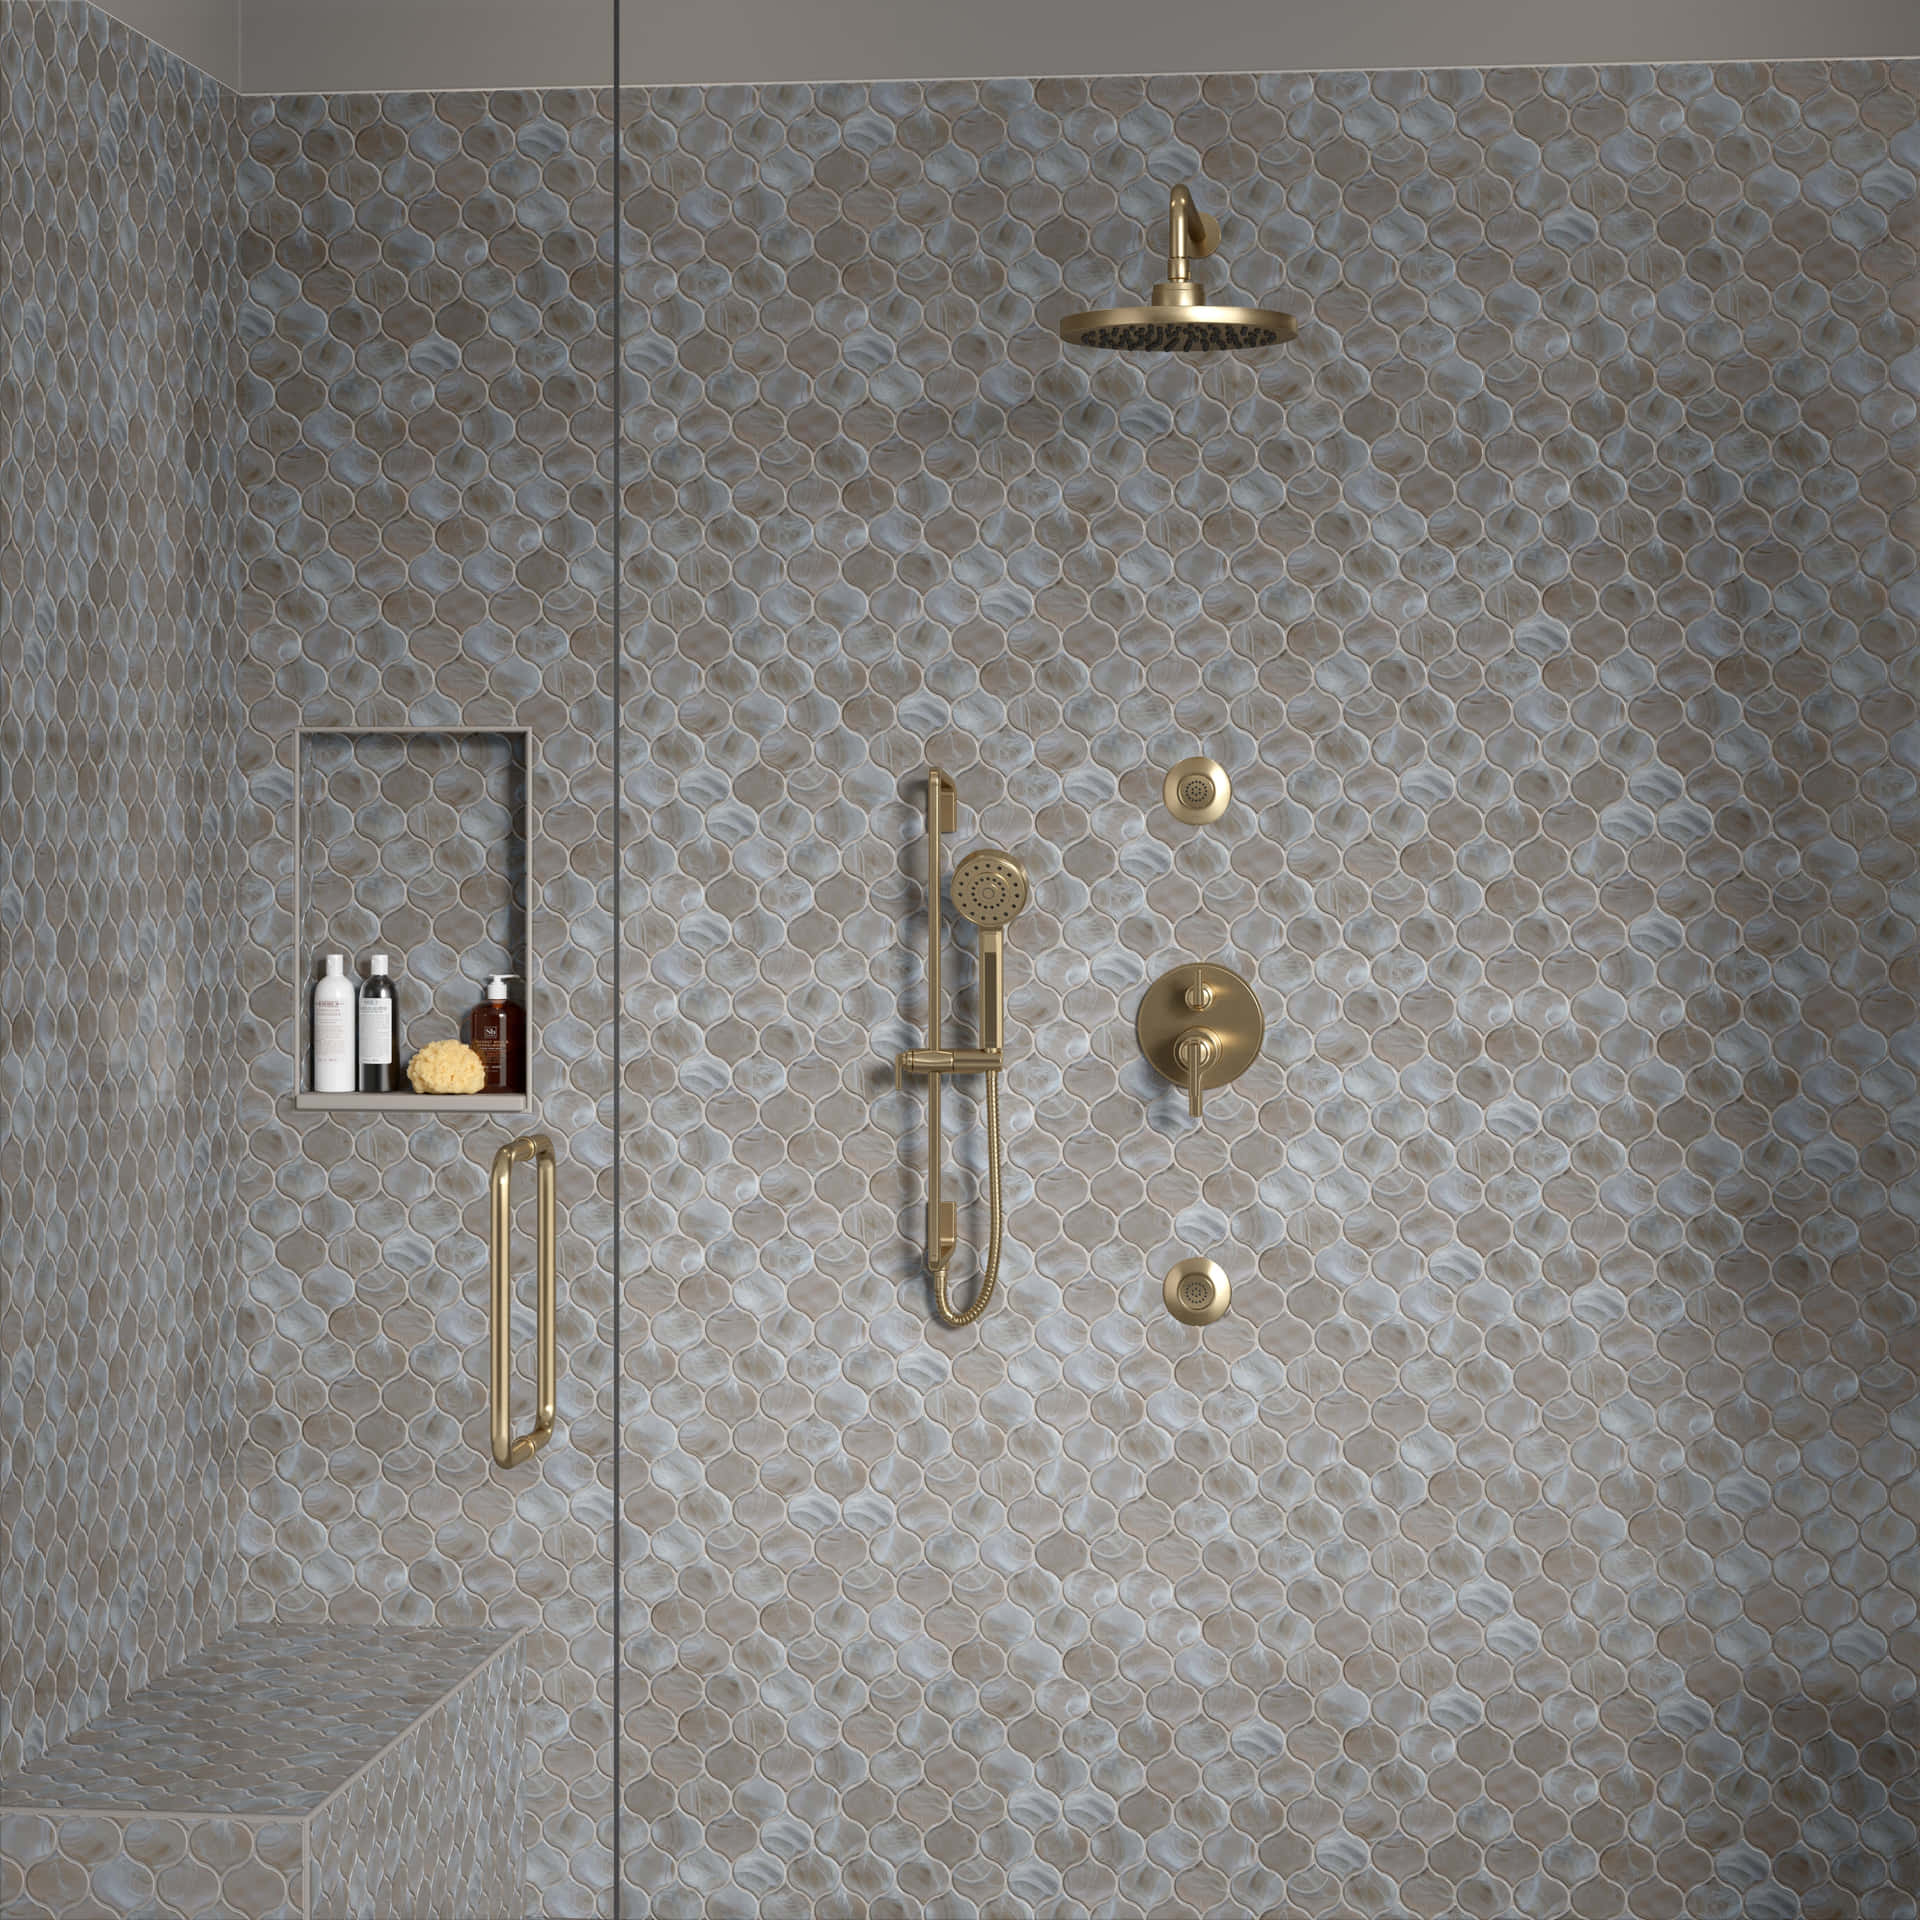 A Bathroom With A Shower And A Gold Shower Head